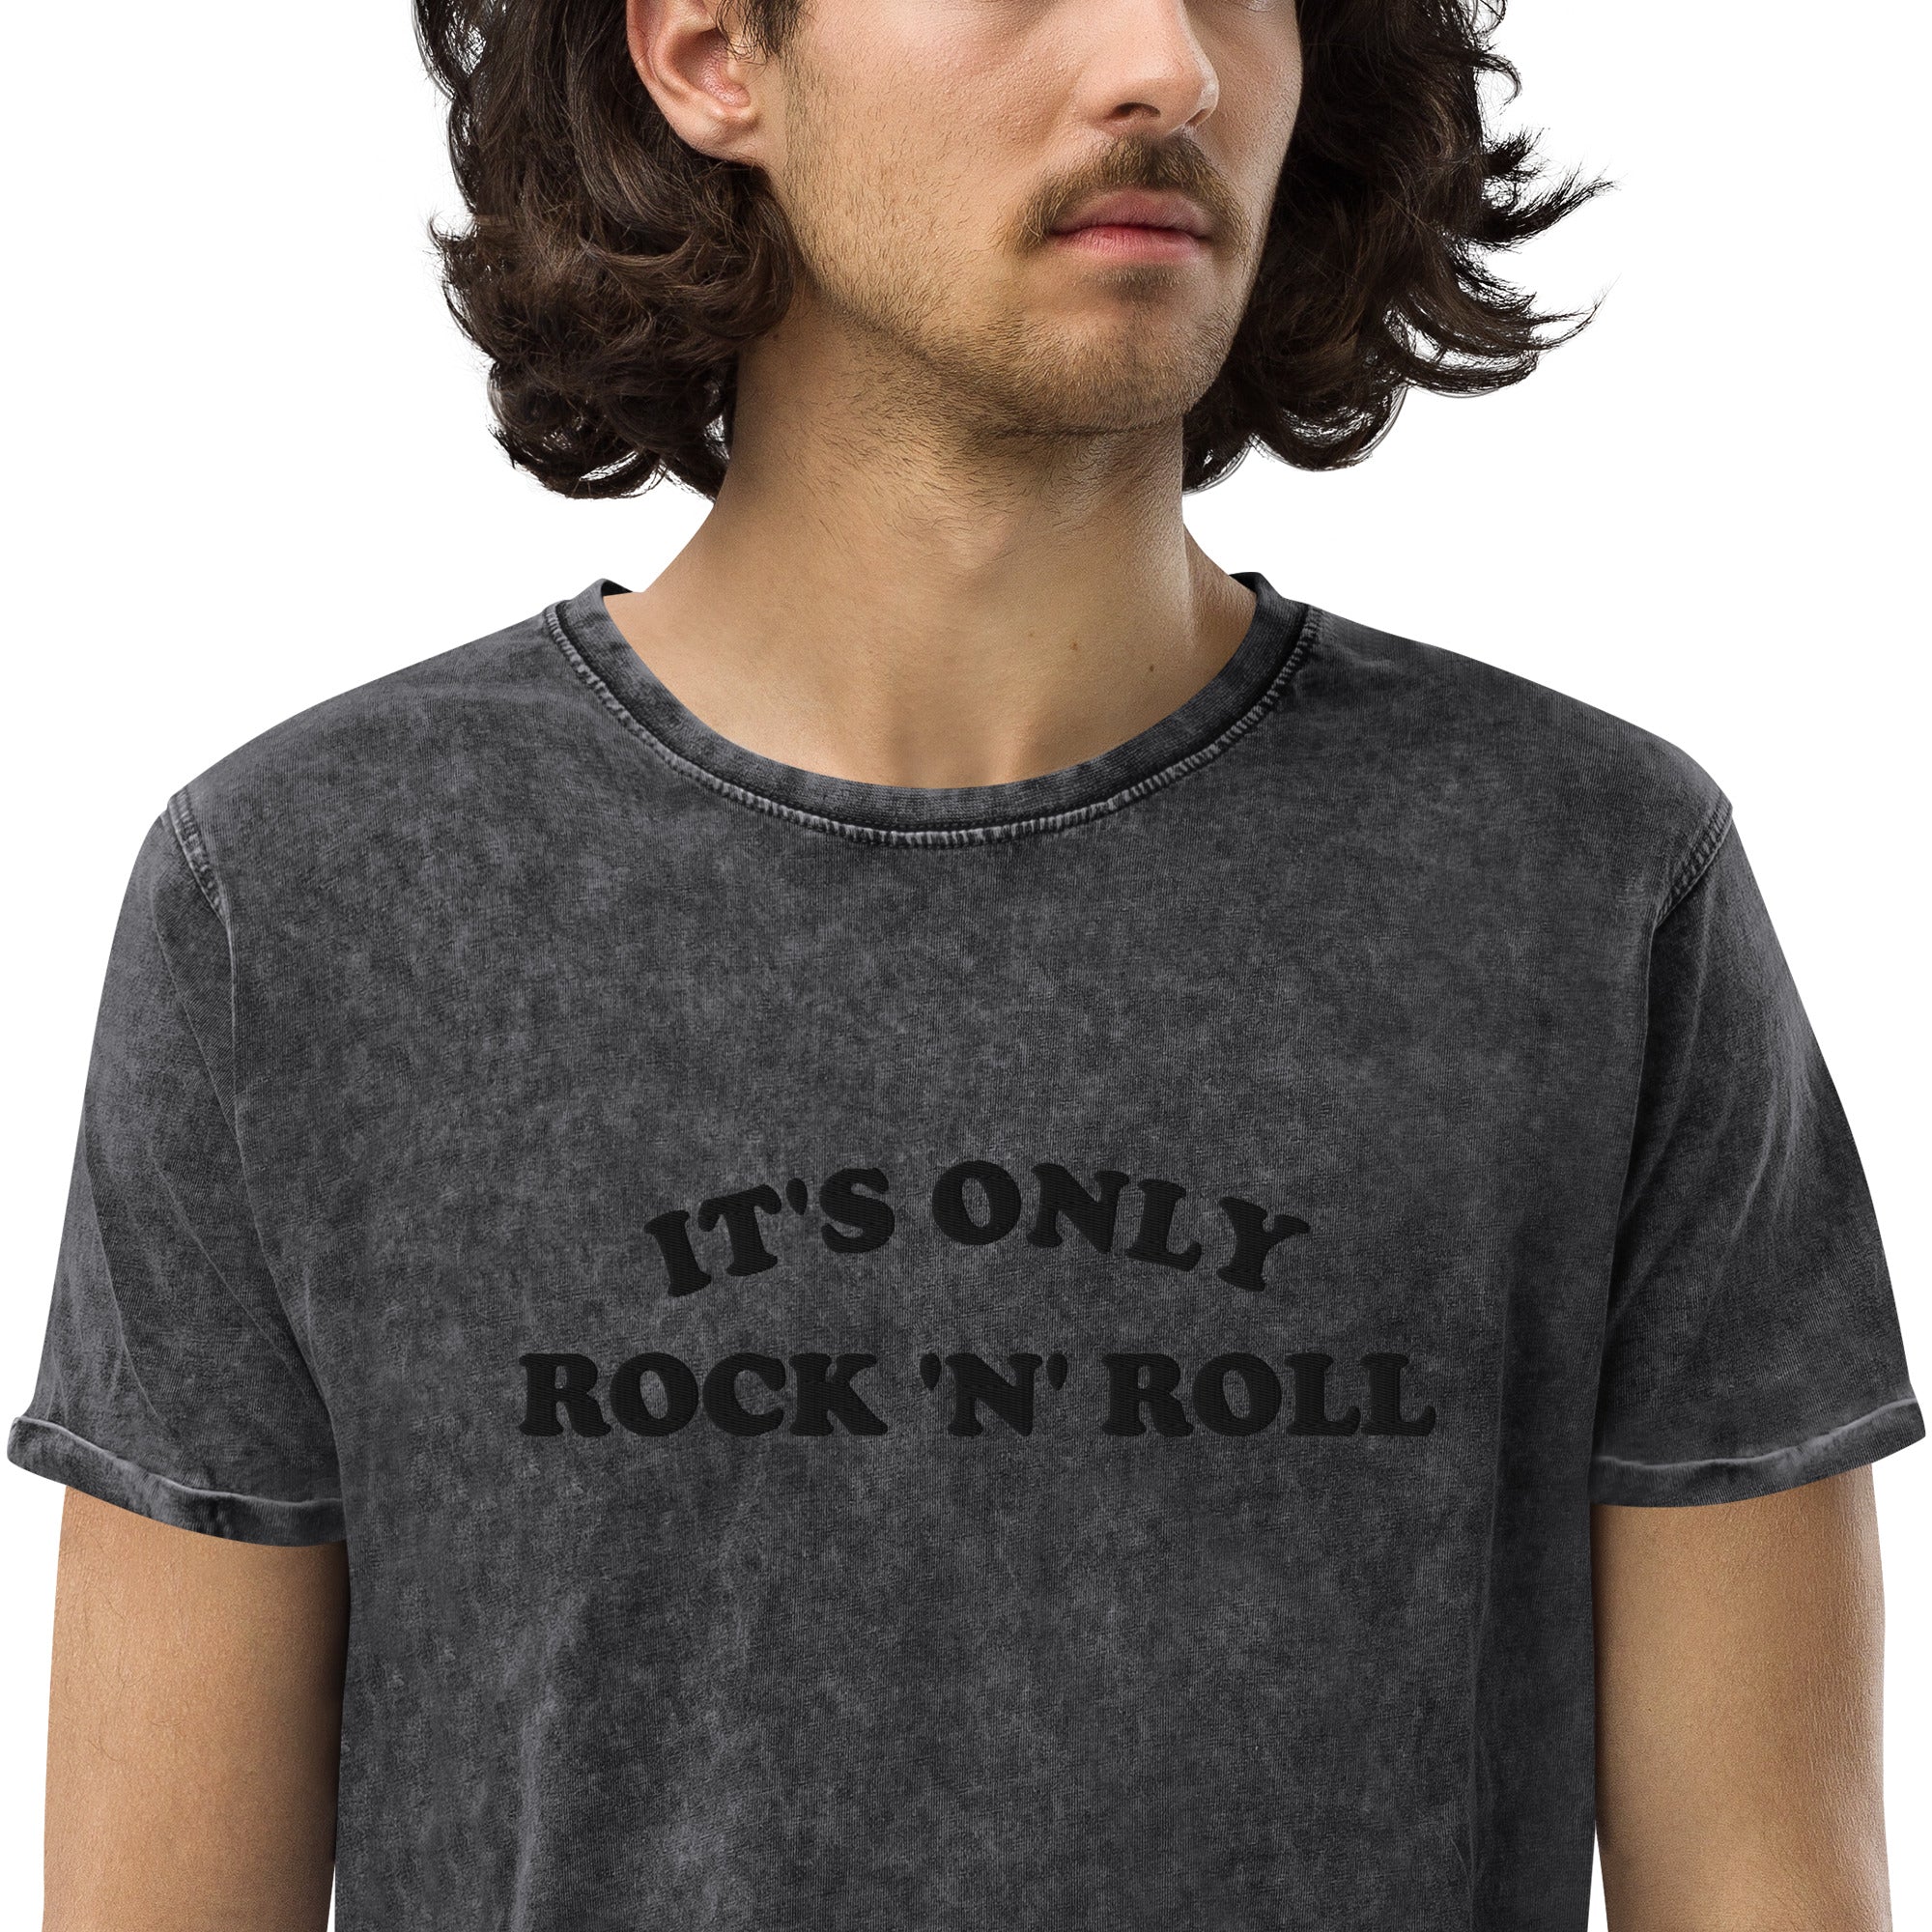 IT'S ONLY ROCK 'N' ROLL Embroidered Vintage Aged Denim Style Unisex T-Shirt